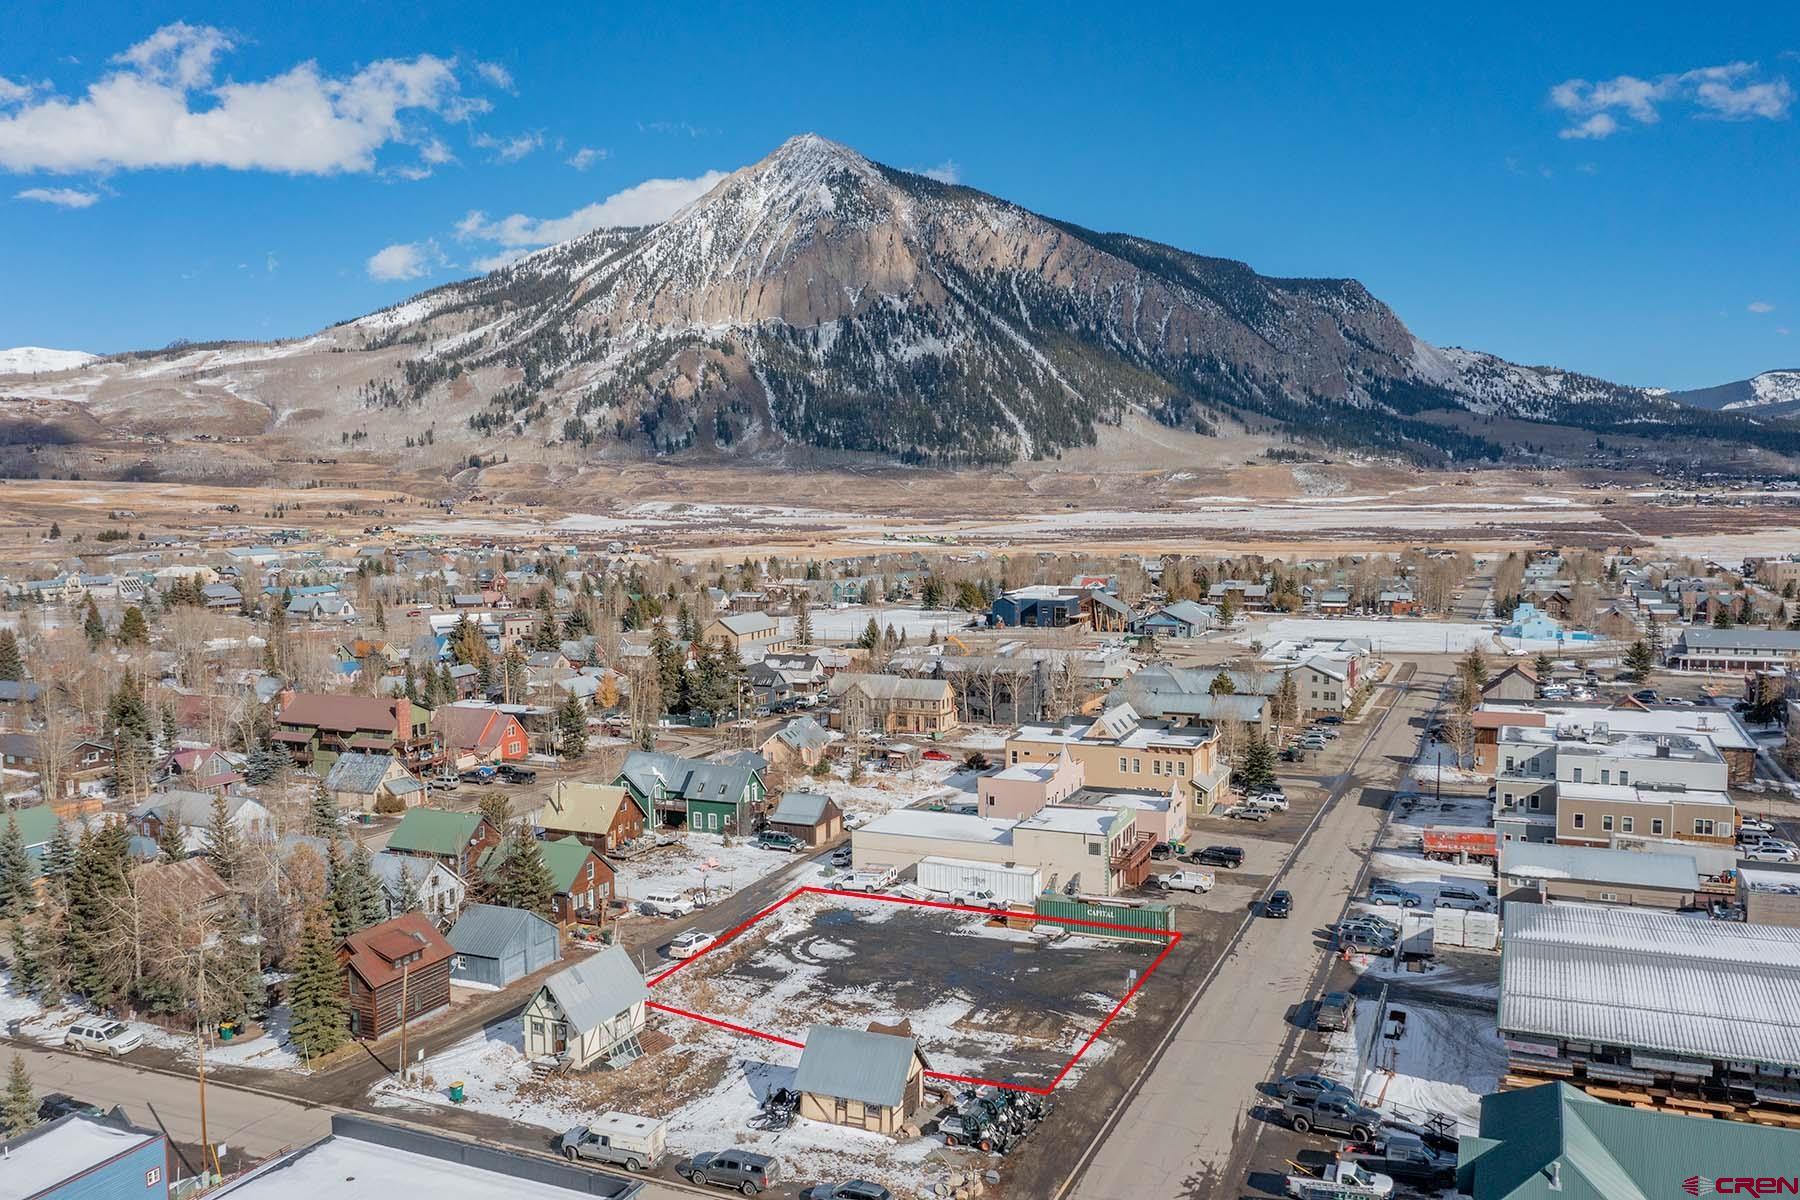 409,411 413 Belleview Avenue, Crested Butte, CO 81224